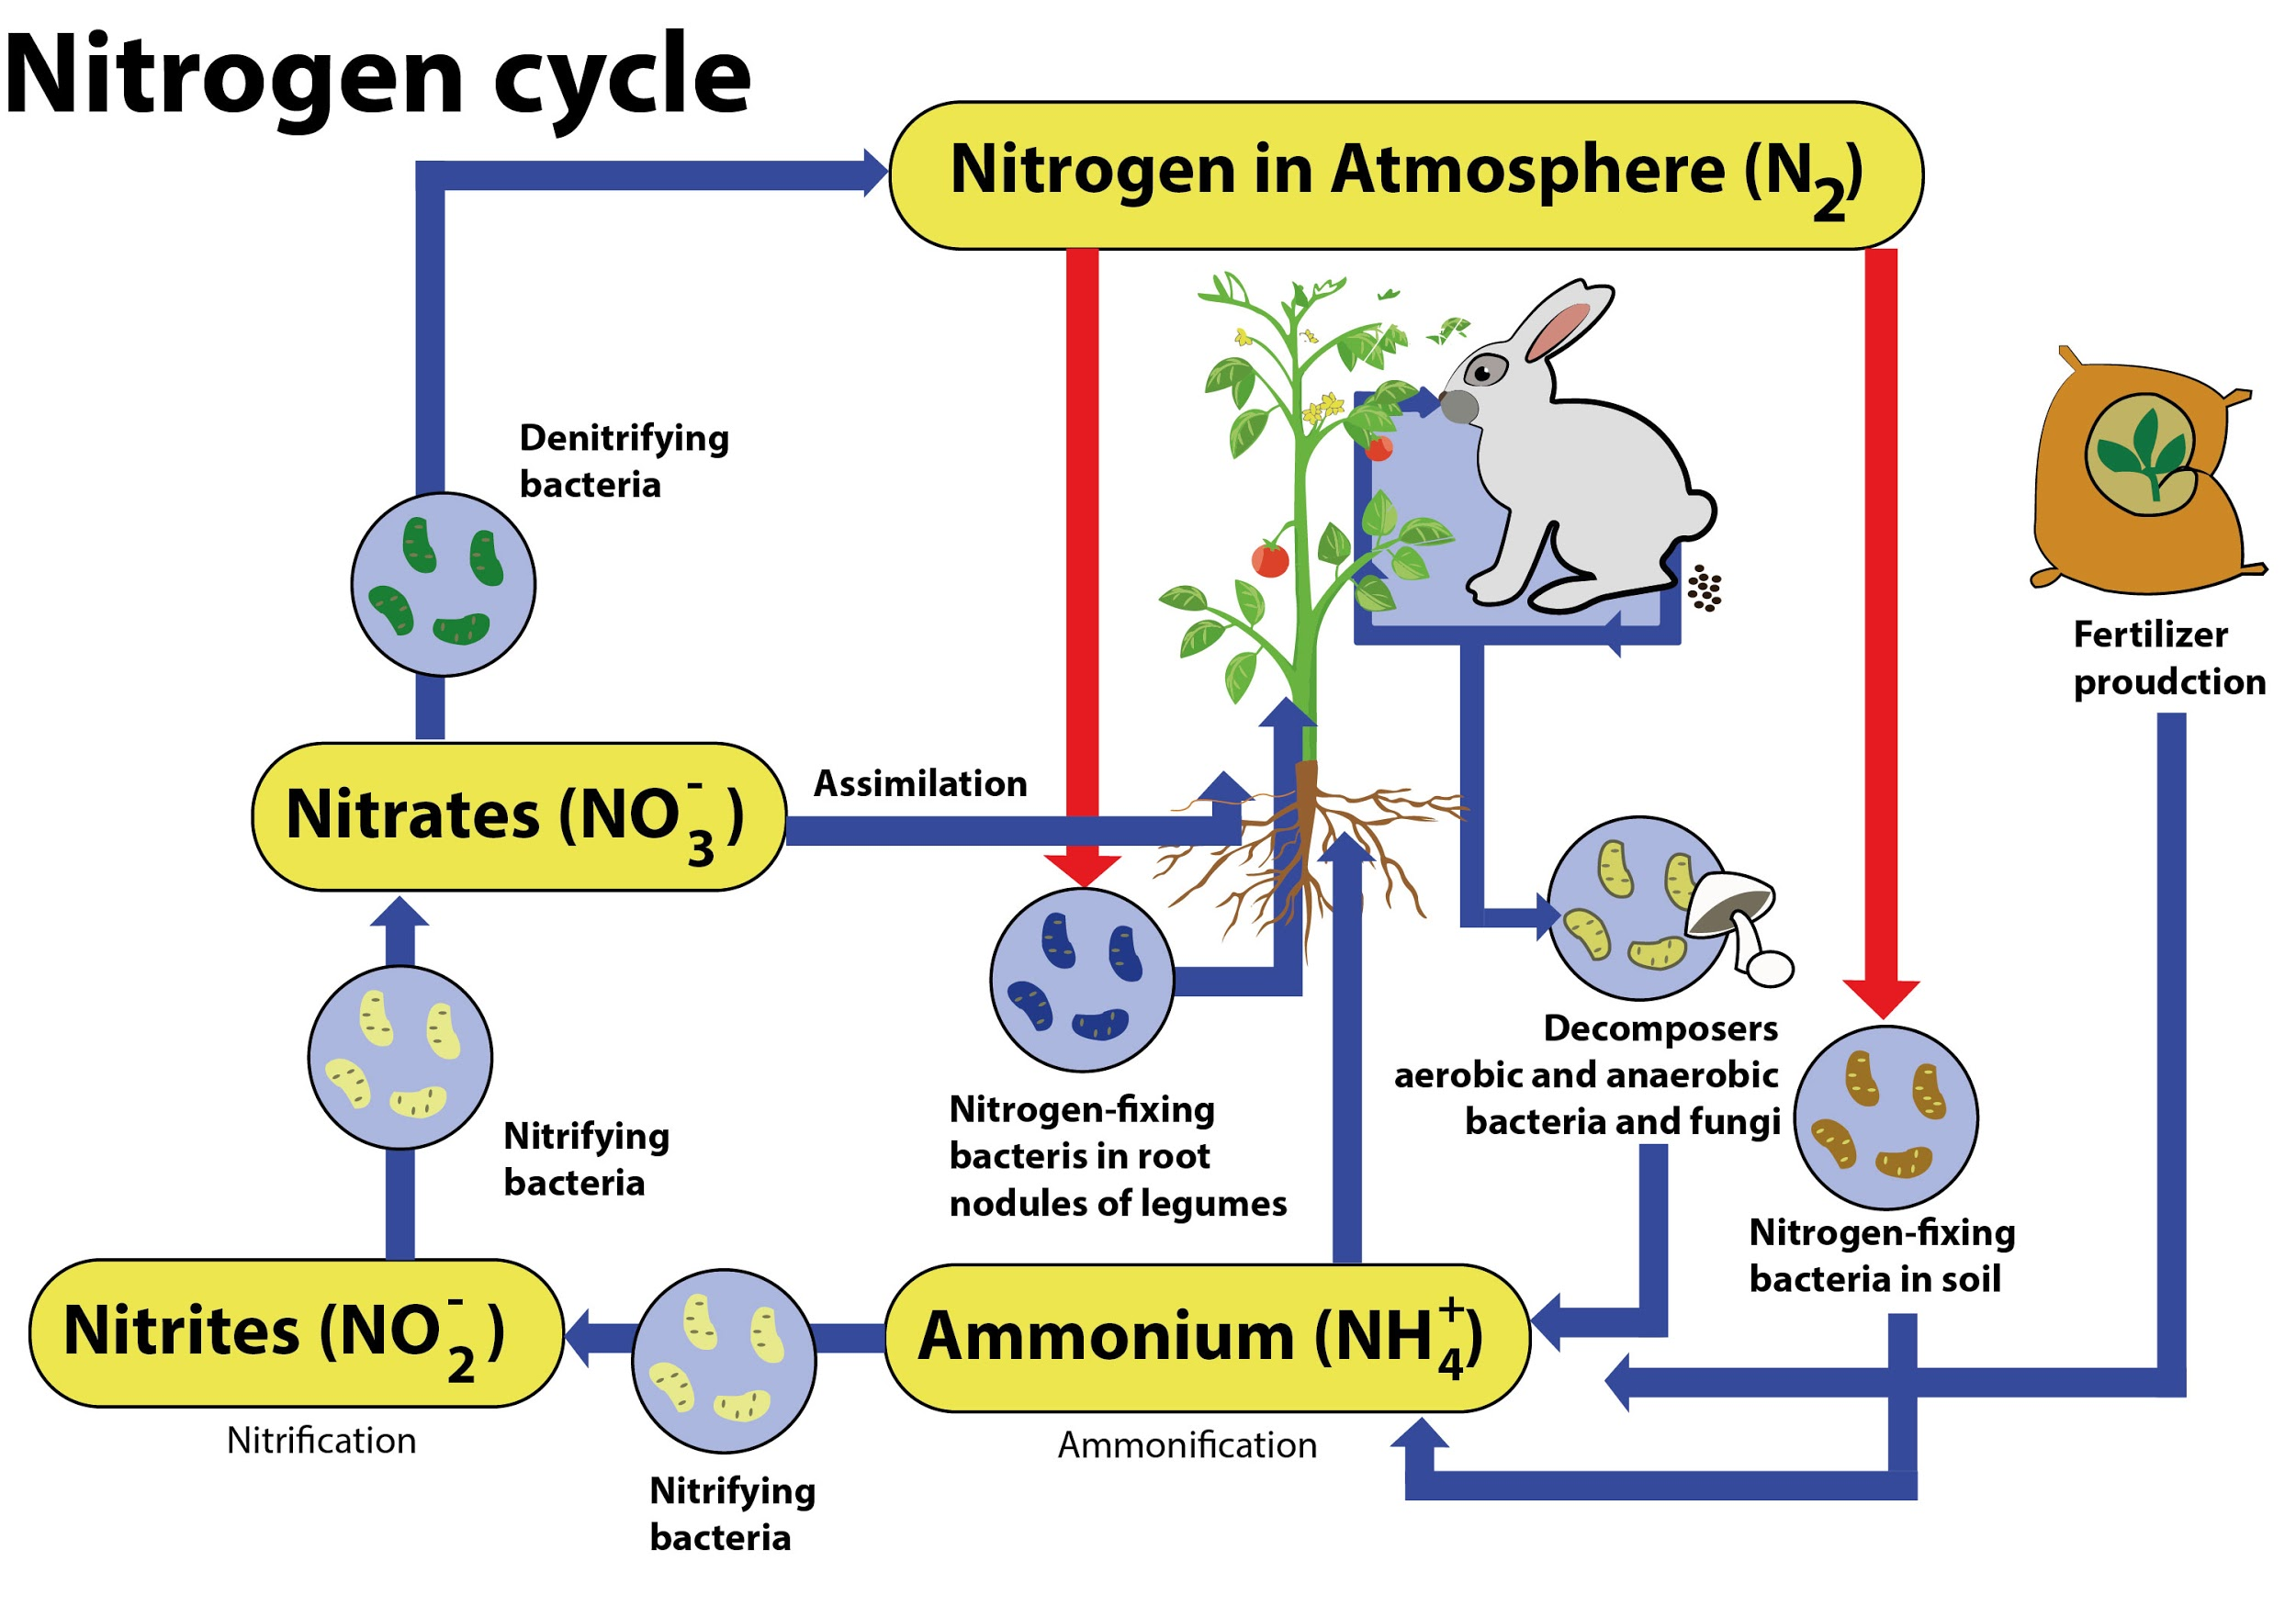 Describe the nitrogen cycle with the help of a diagram.